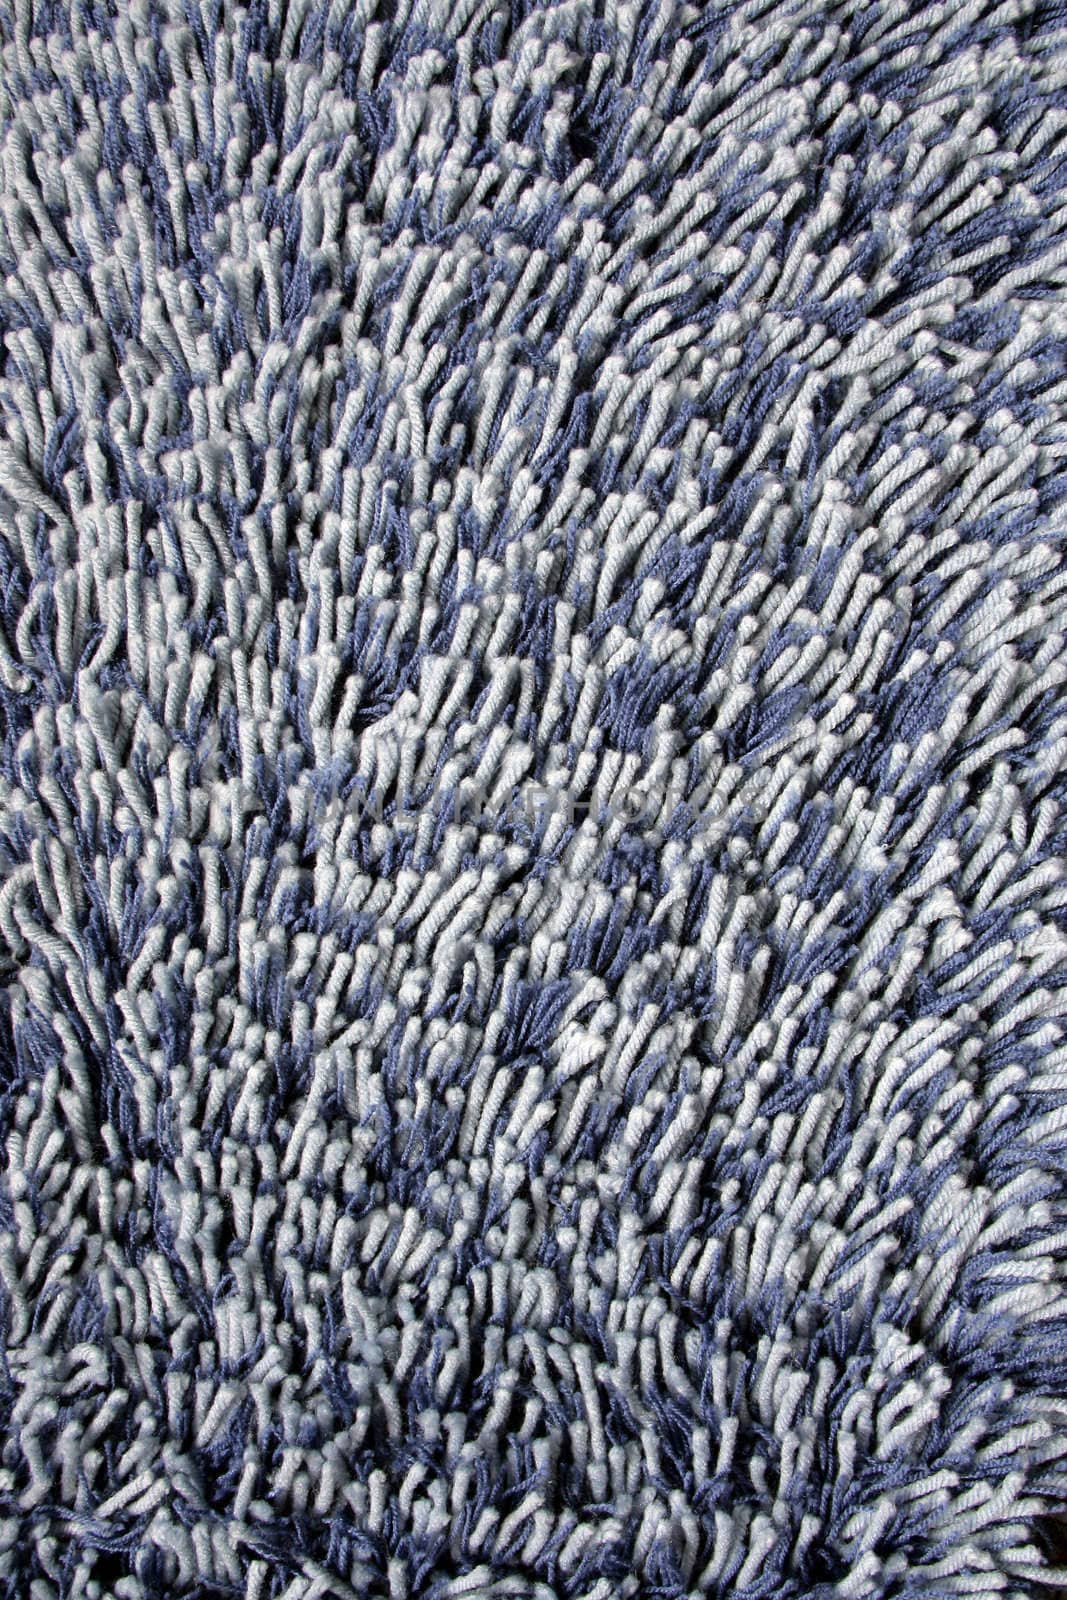 Pile of a white-blue carpet covering